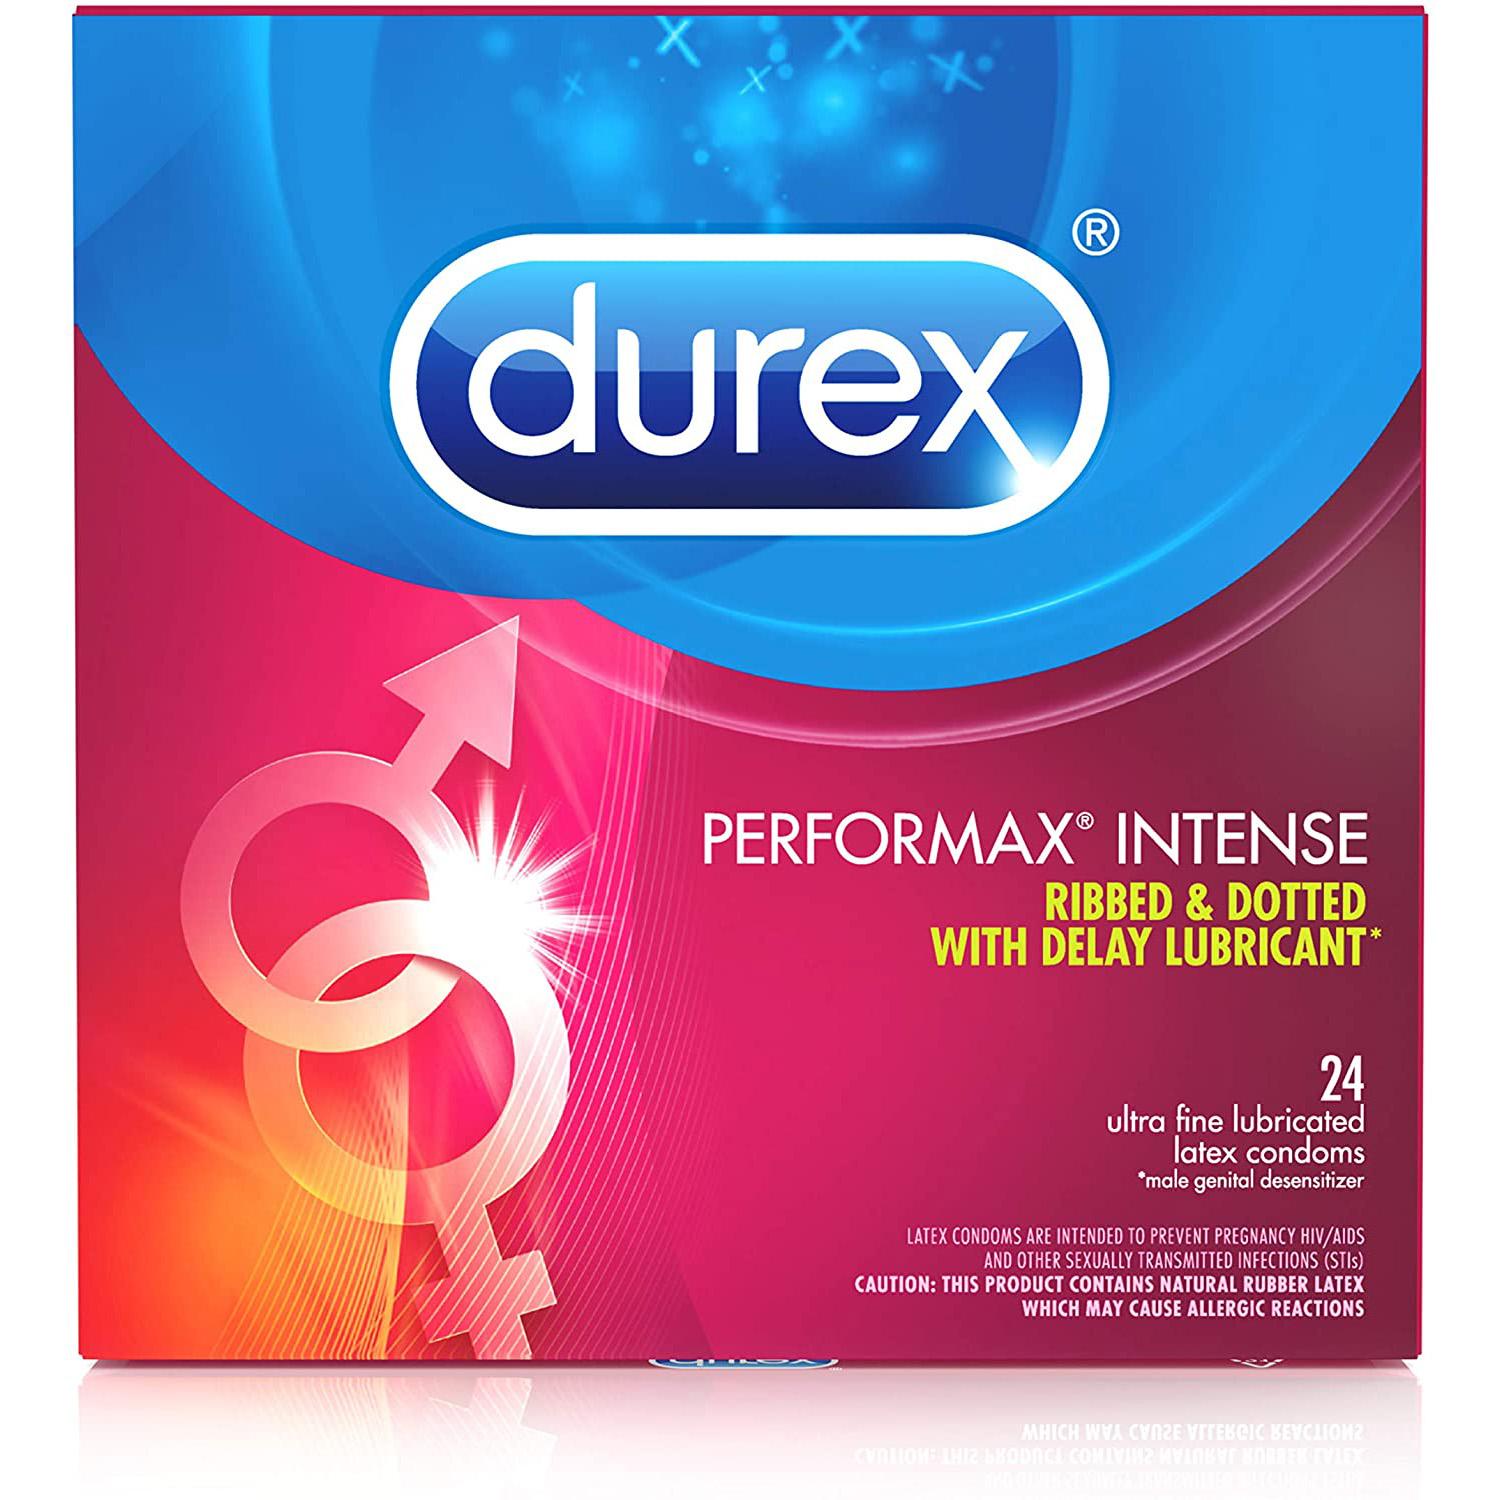 24 Durex Performax Intense Natural Rubber Latex Condoms for $9.33 Shipped